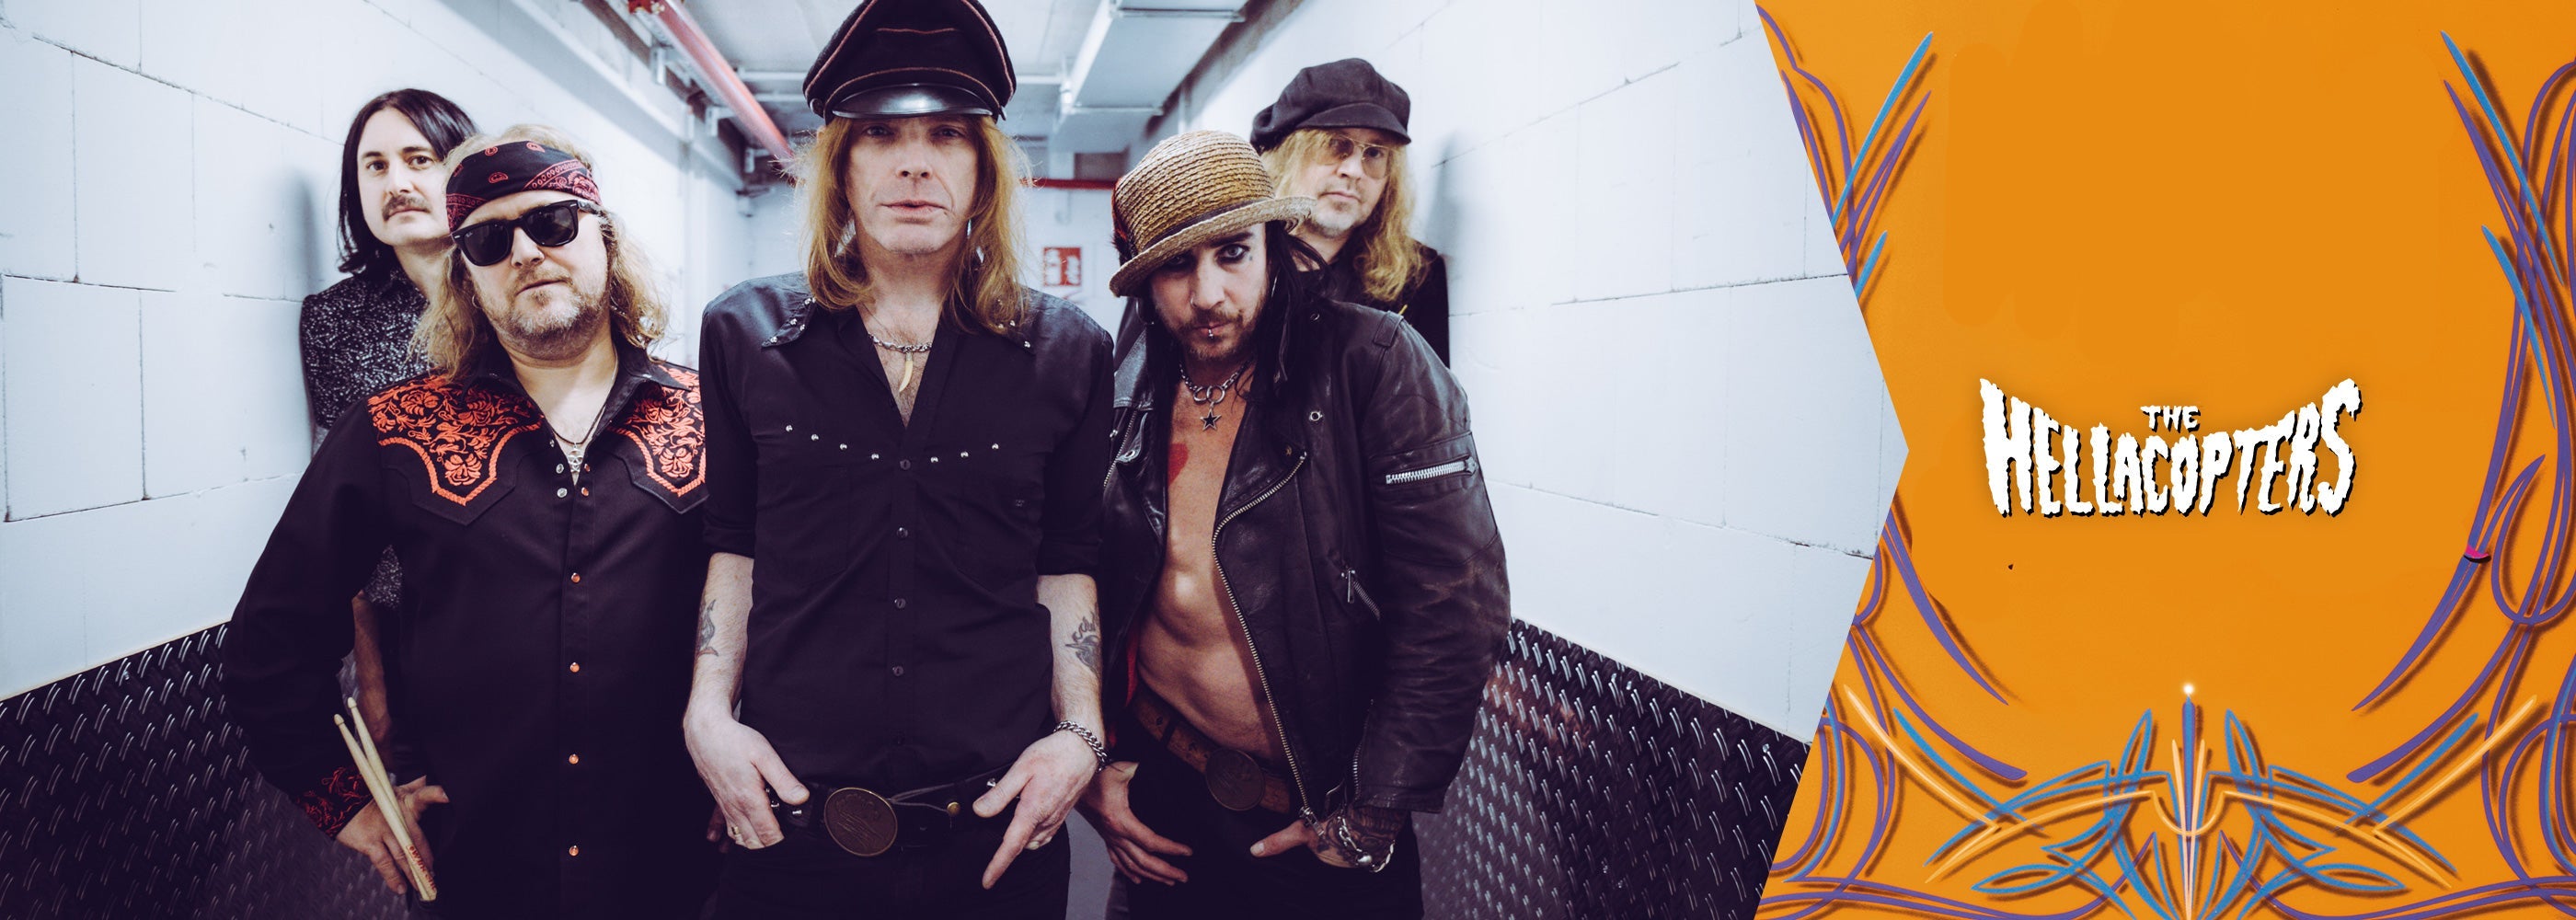 The Hellacopters - Header